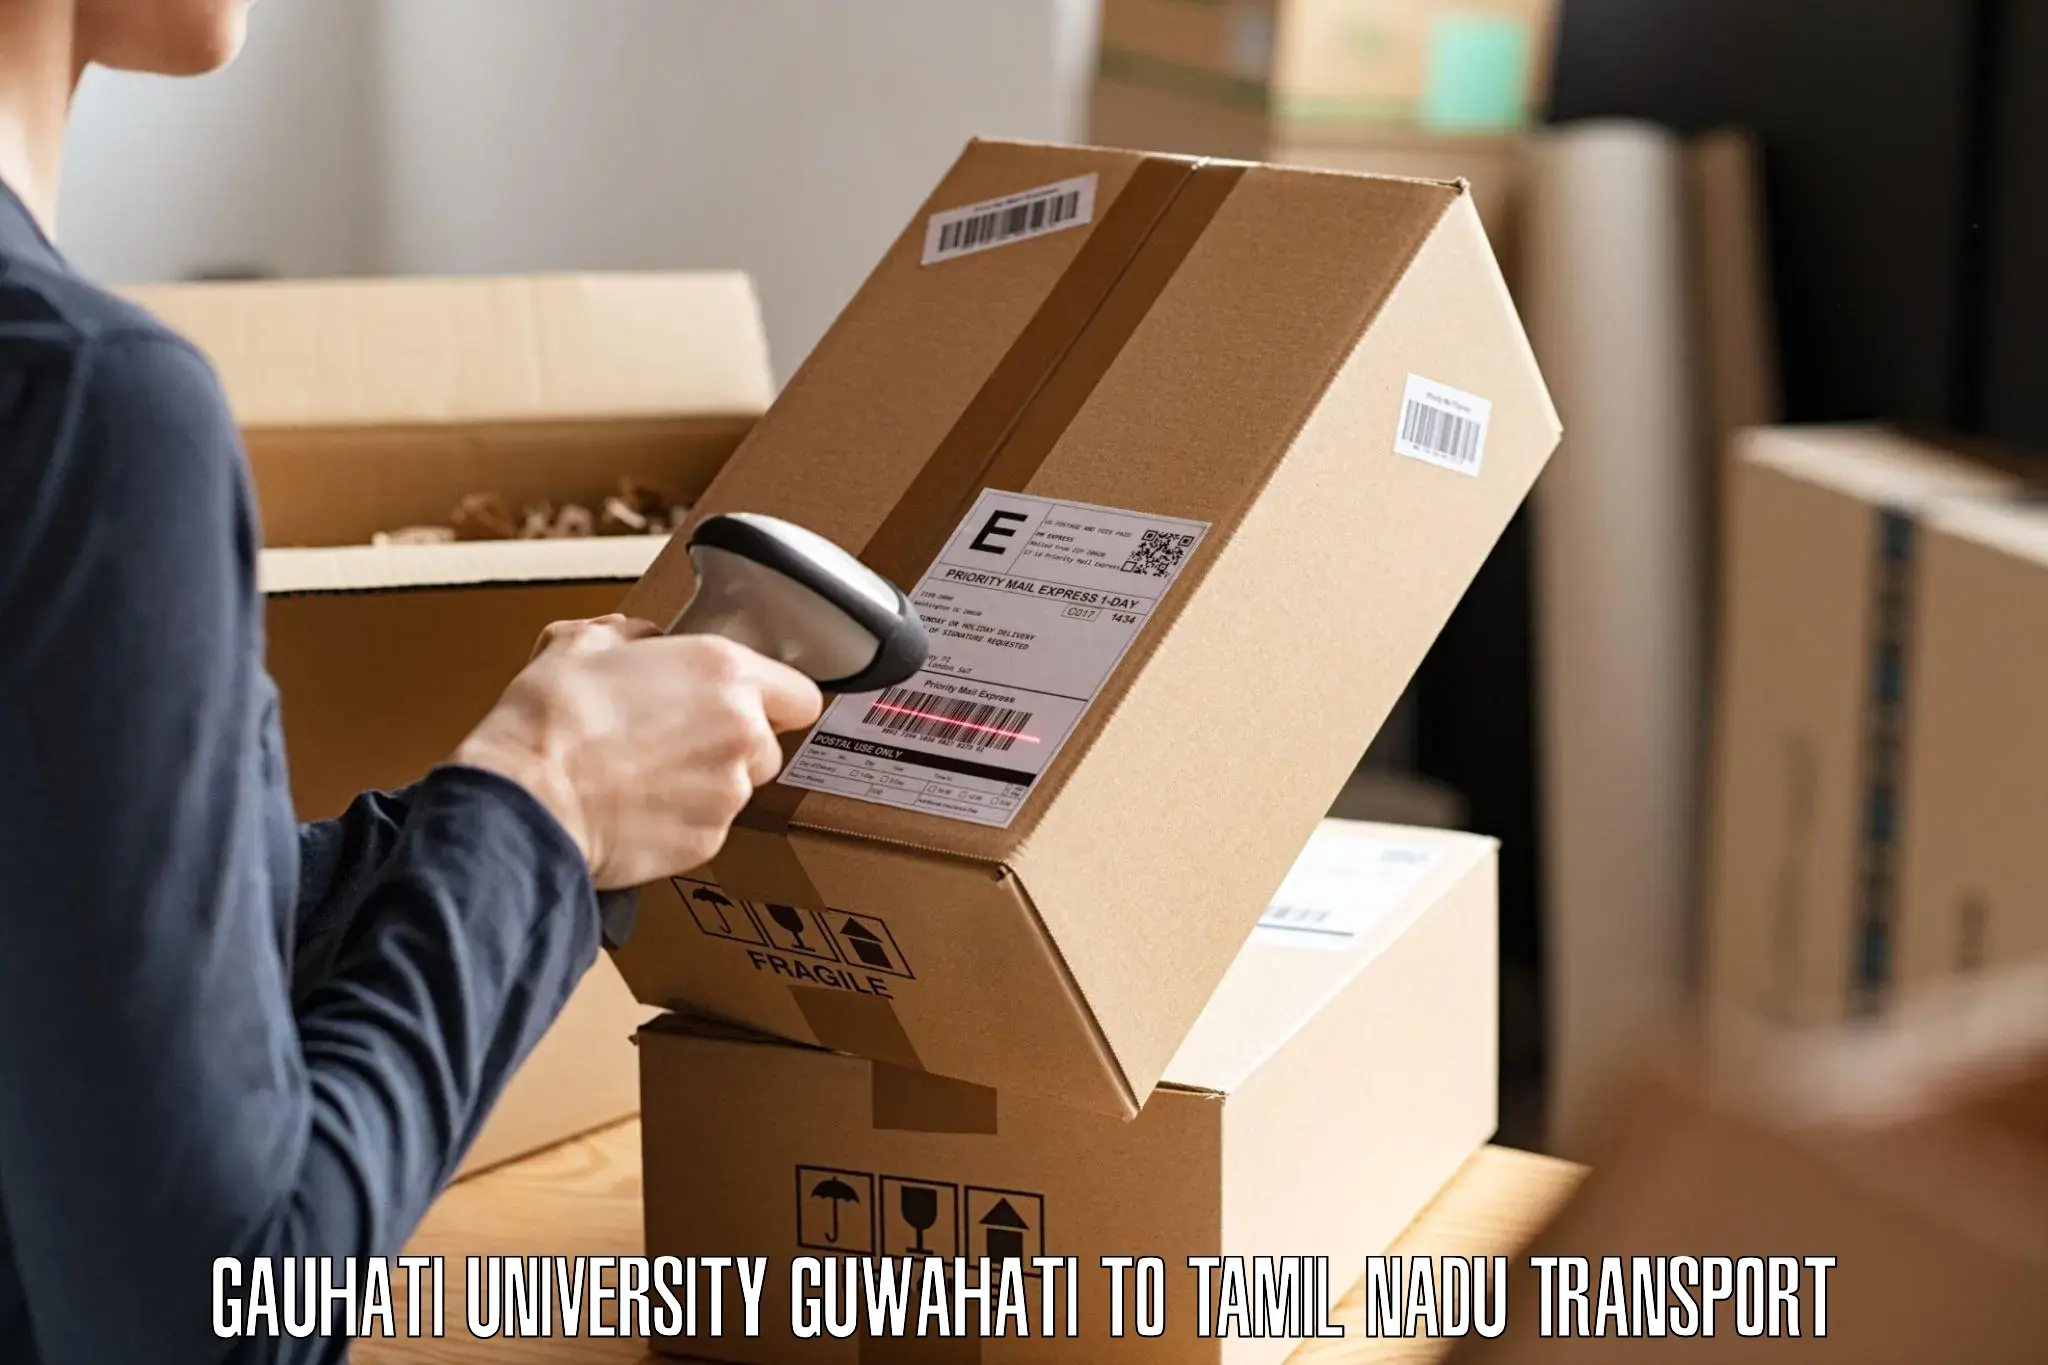 Material transport services Gauhati University Guwahati to Sri Ramachandra Institute of Higher Education and Research Chennai